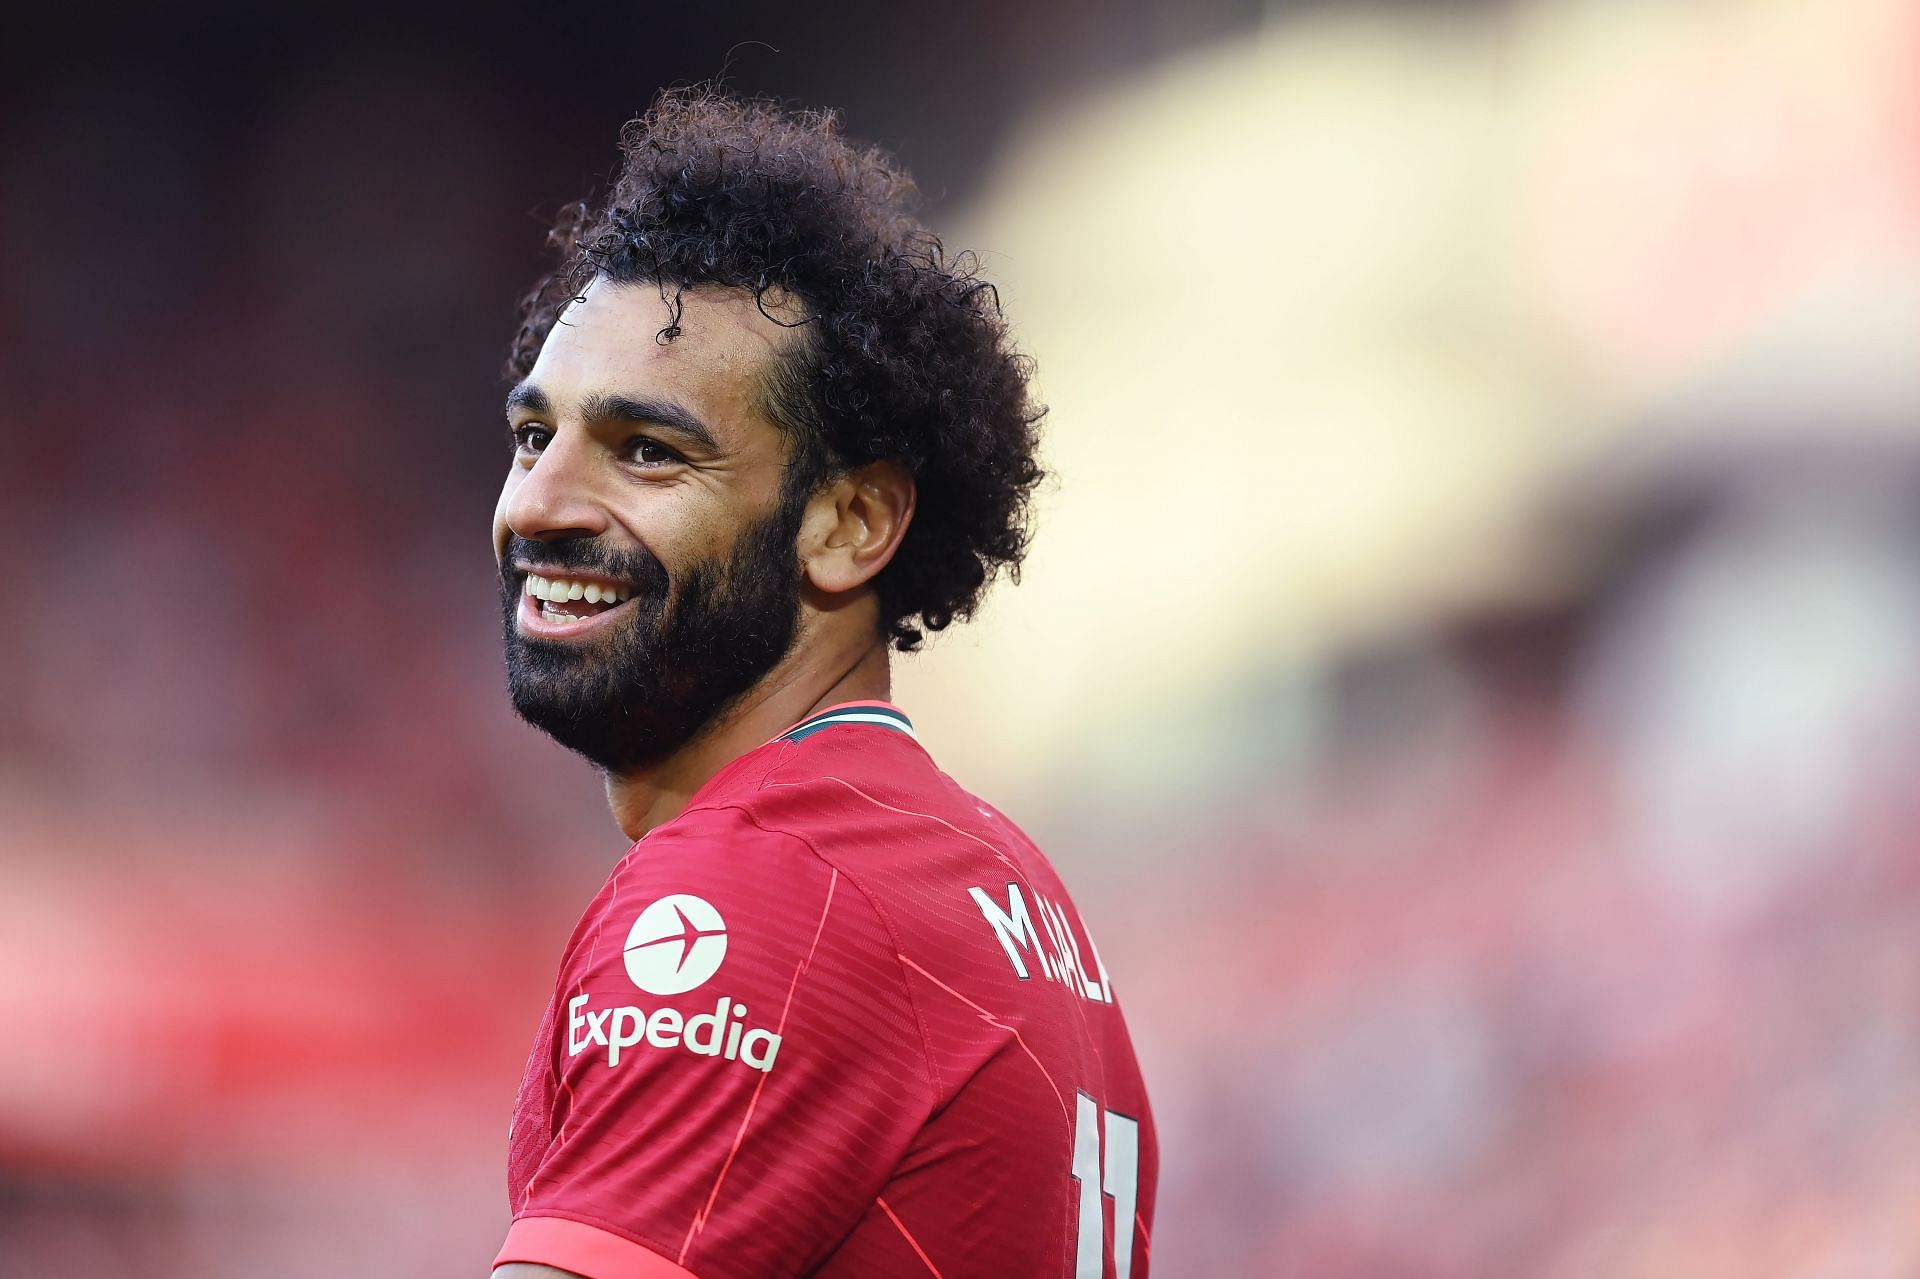 Mohamed Salah could be a key player for Liverpool in the Carabao Cup final